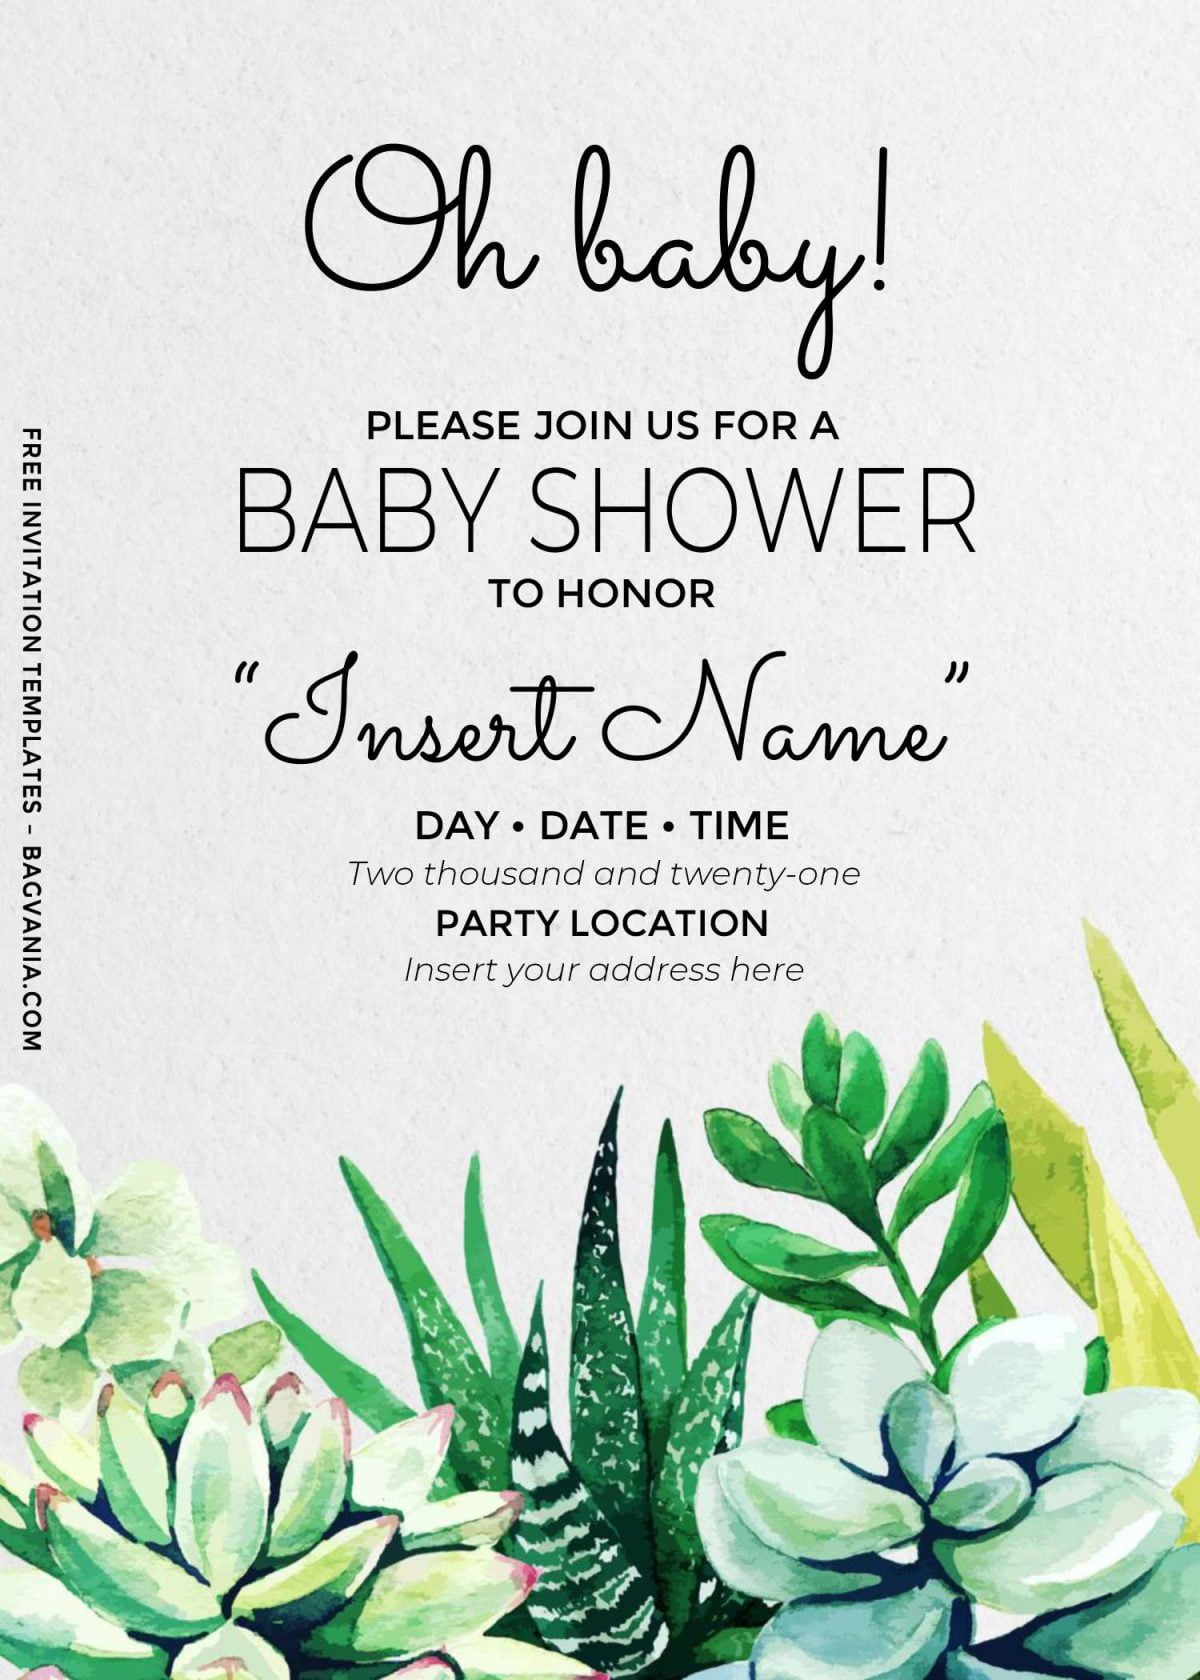 Free Oh Baby Cactus Birthday Invitation Templates For Word and has watercolor succulent plants